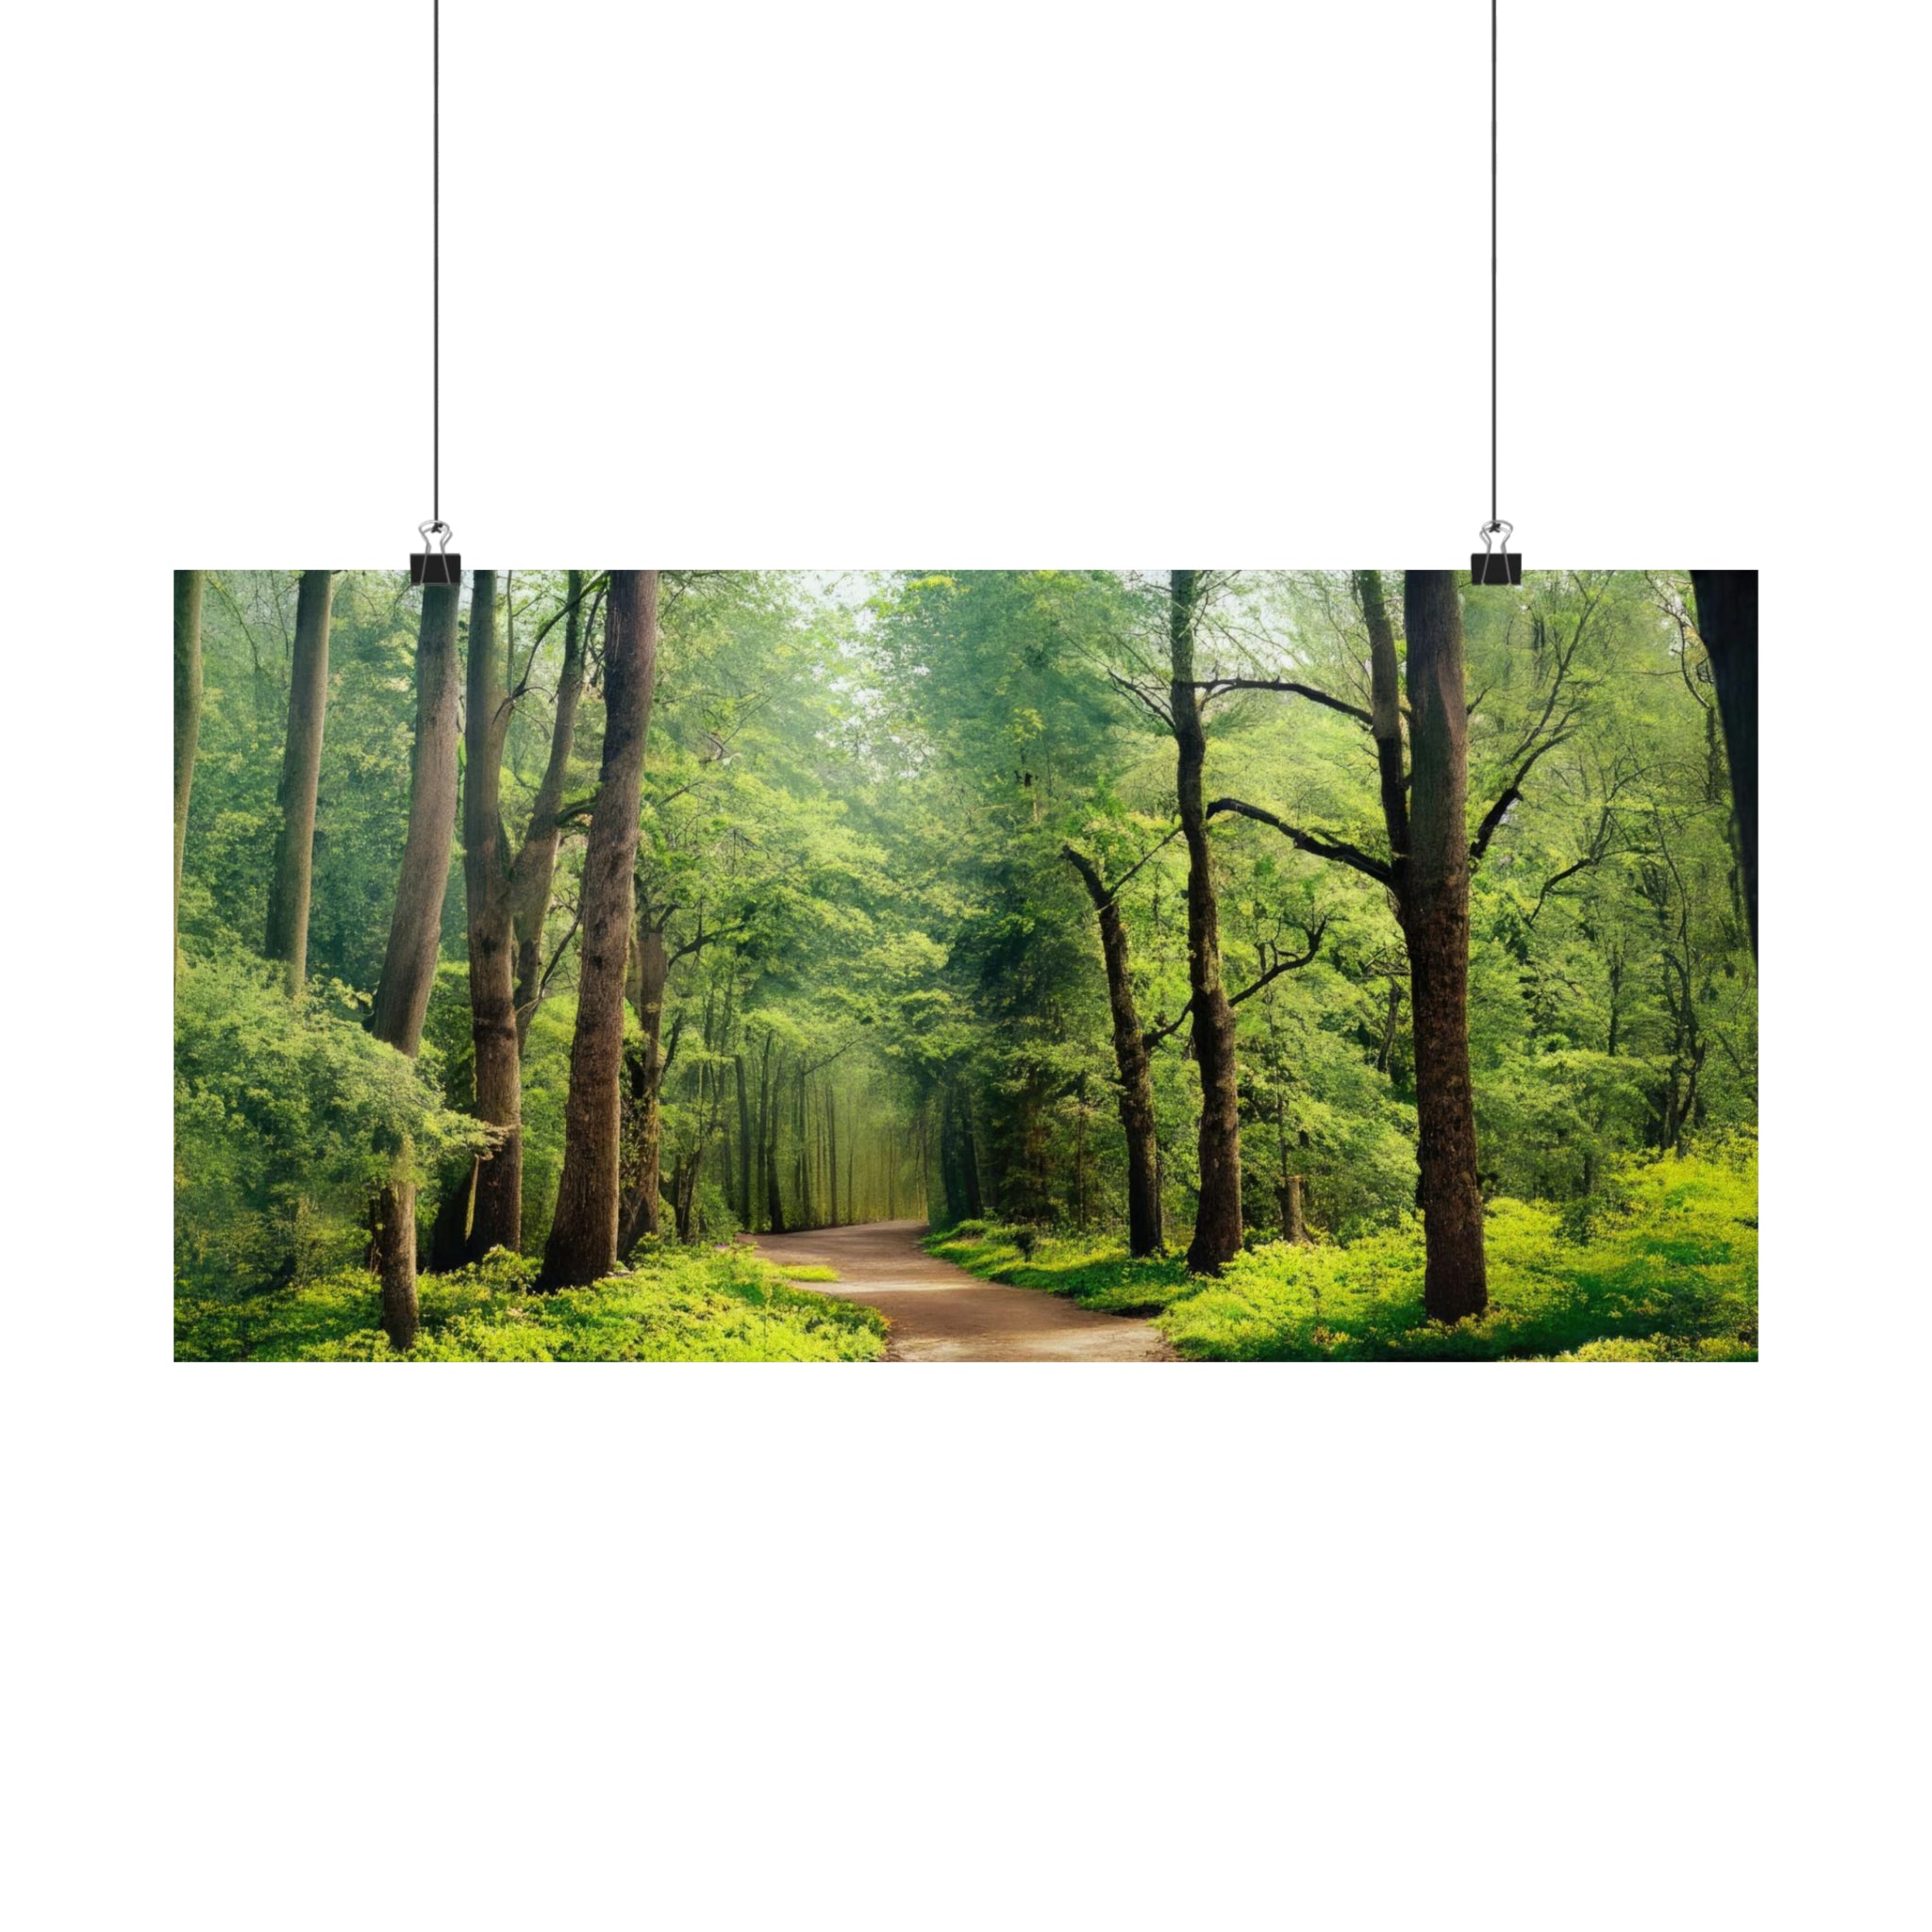 Cuivre River State Park's Greenery Poster